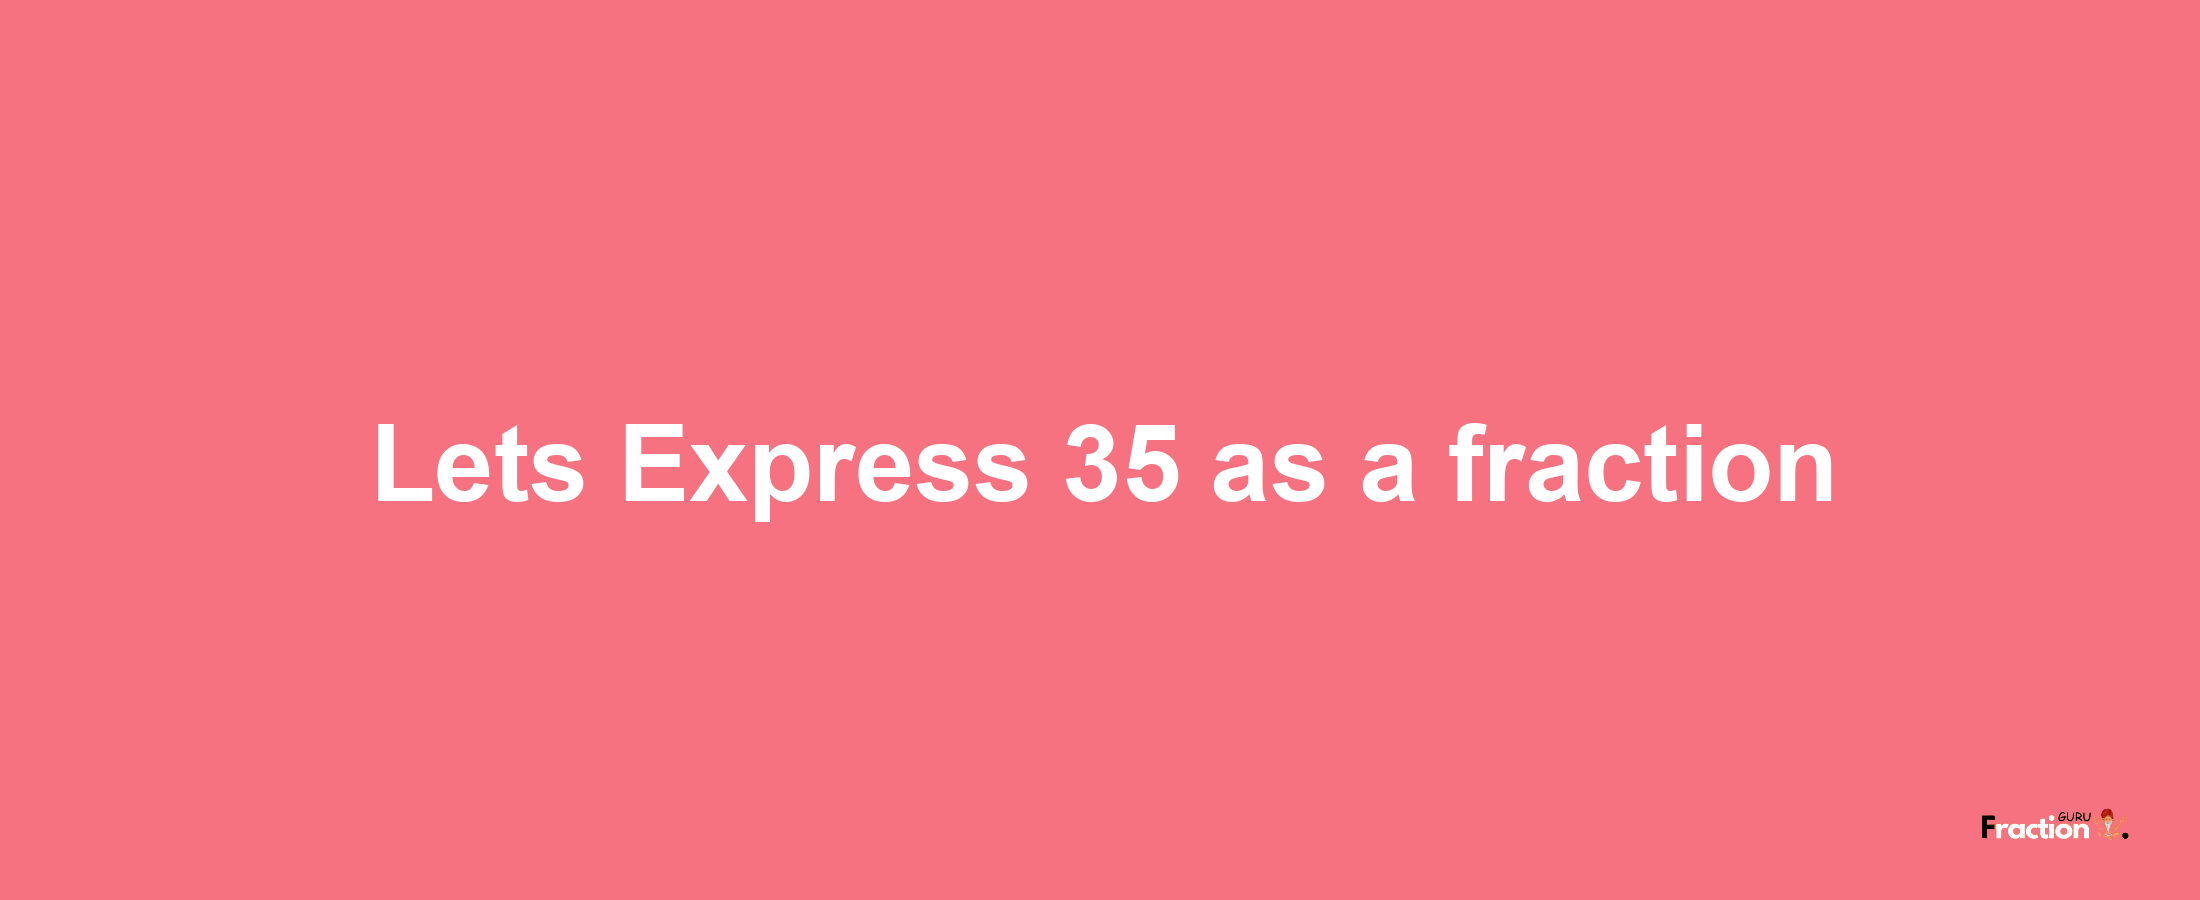 Lets Express 35 as afraction